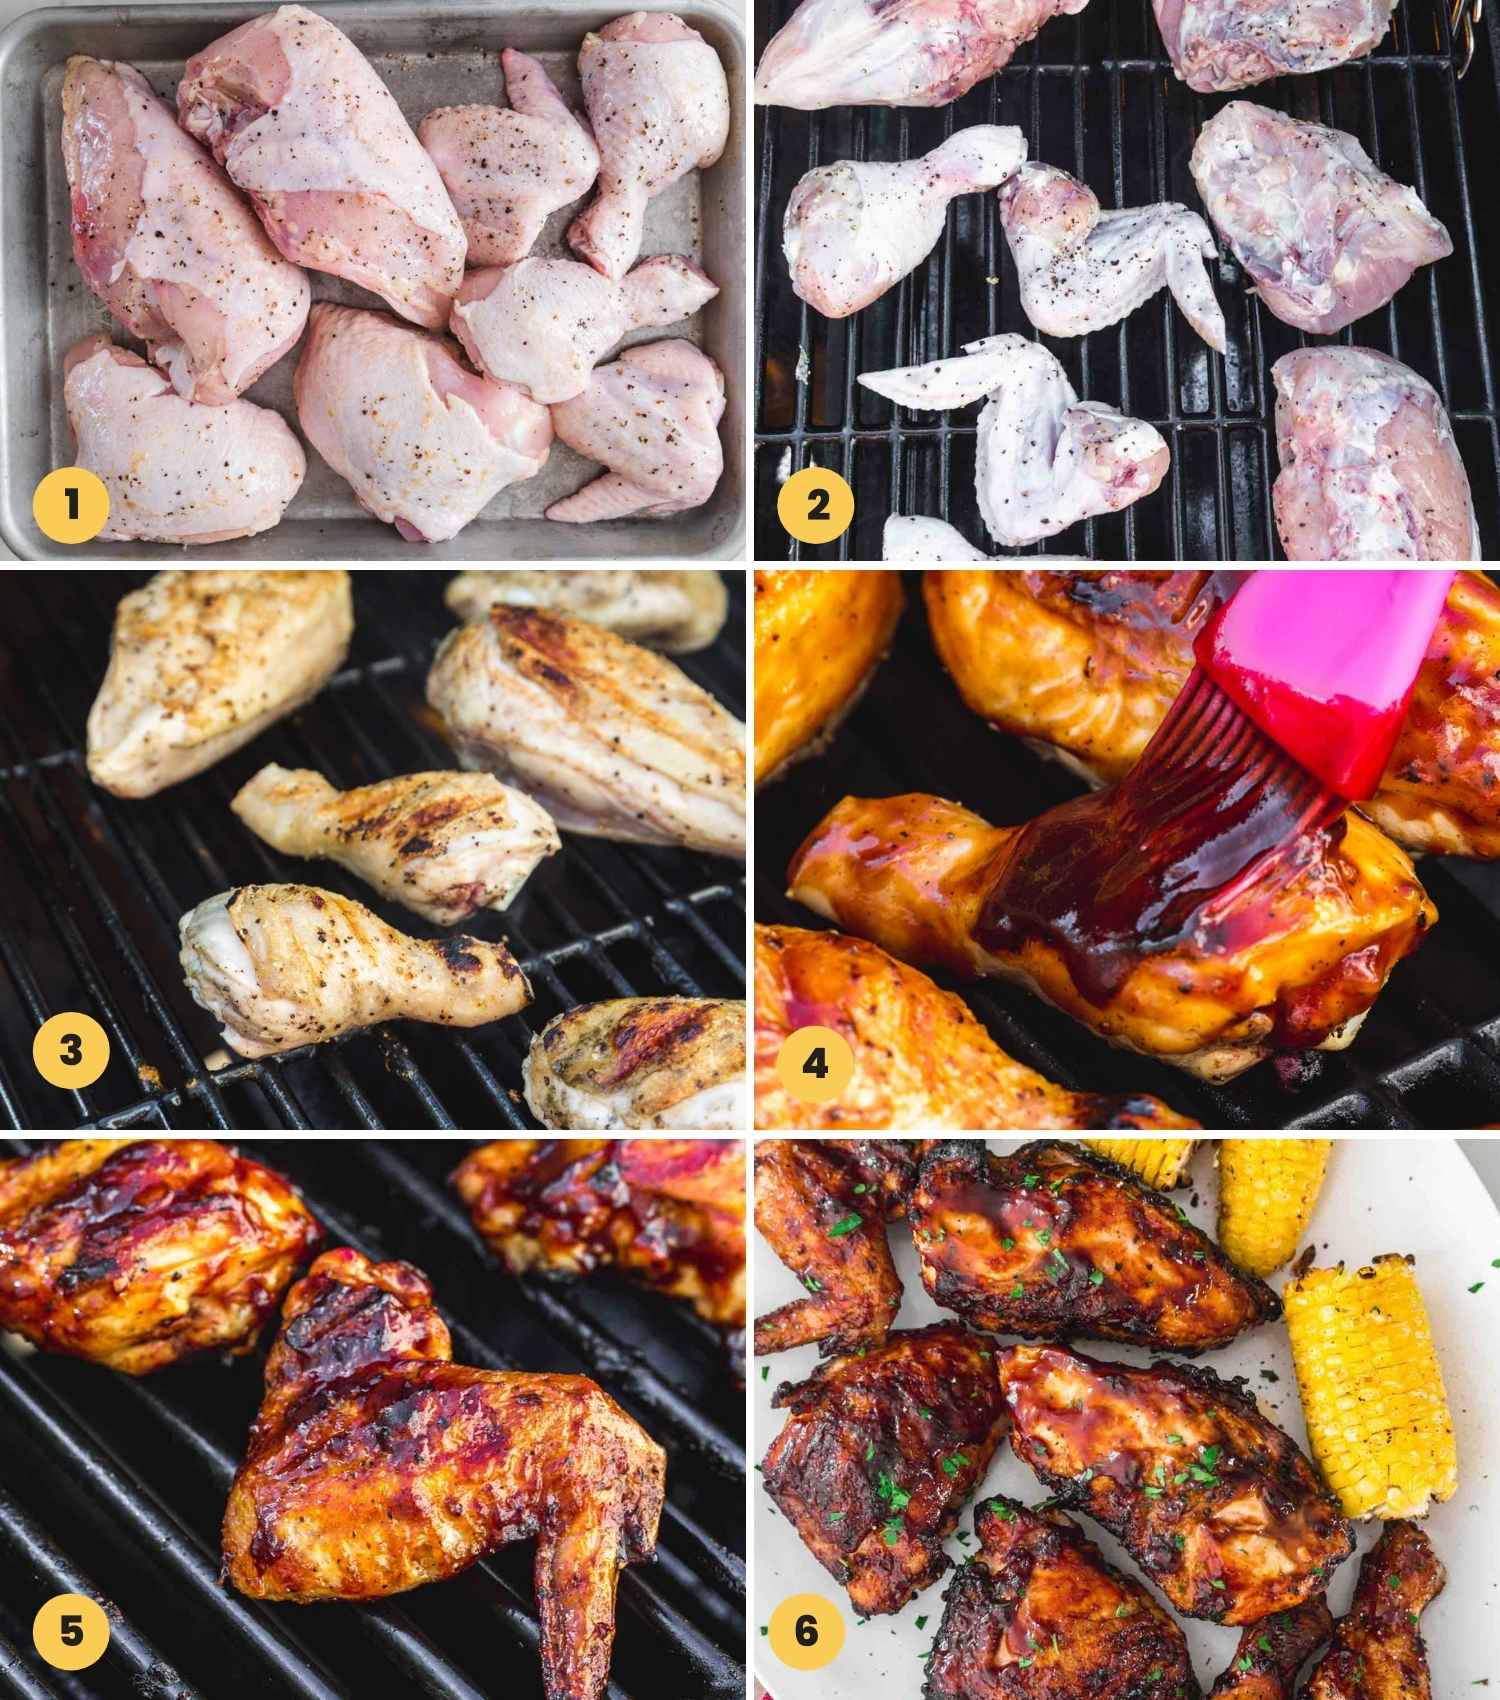 A collage with six images showing how to make grilled BBQ chicken, from seasoning, to grilling, to apply BBQ sauce.